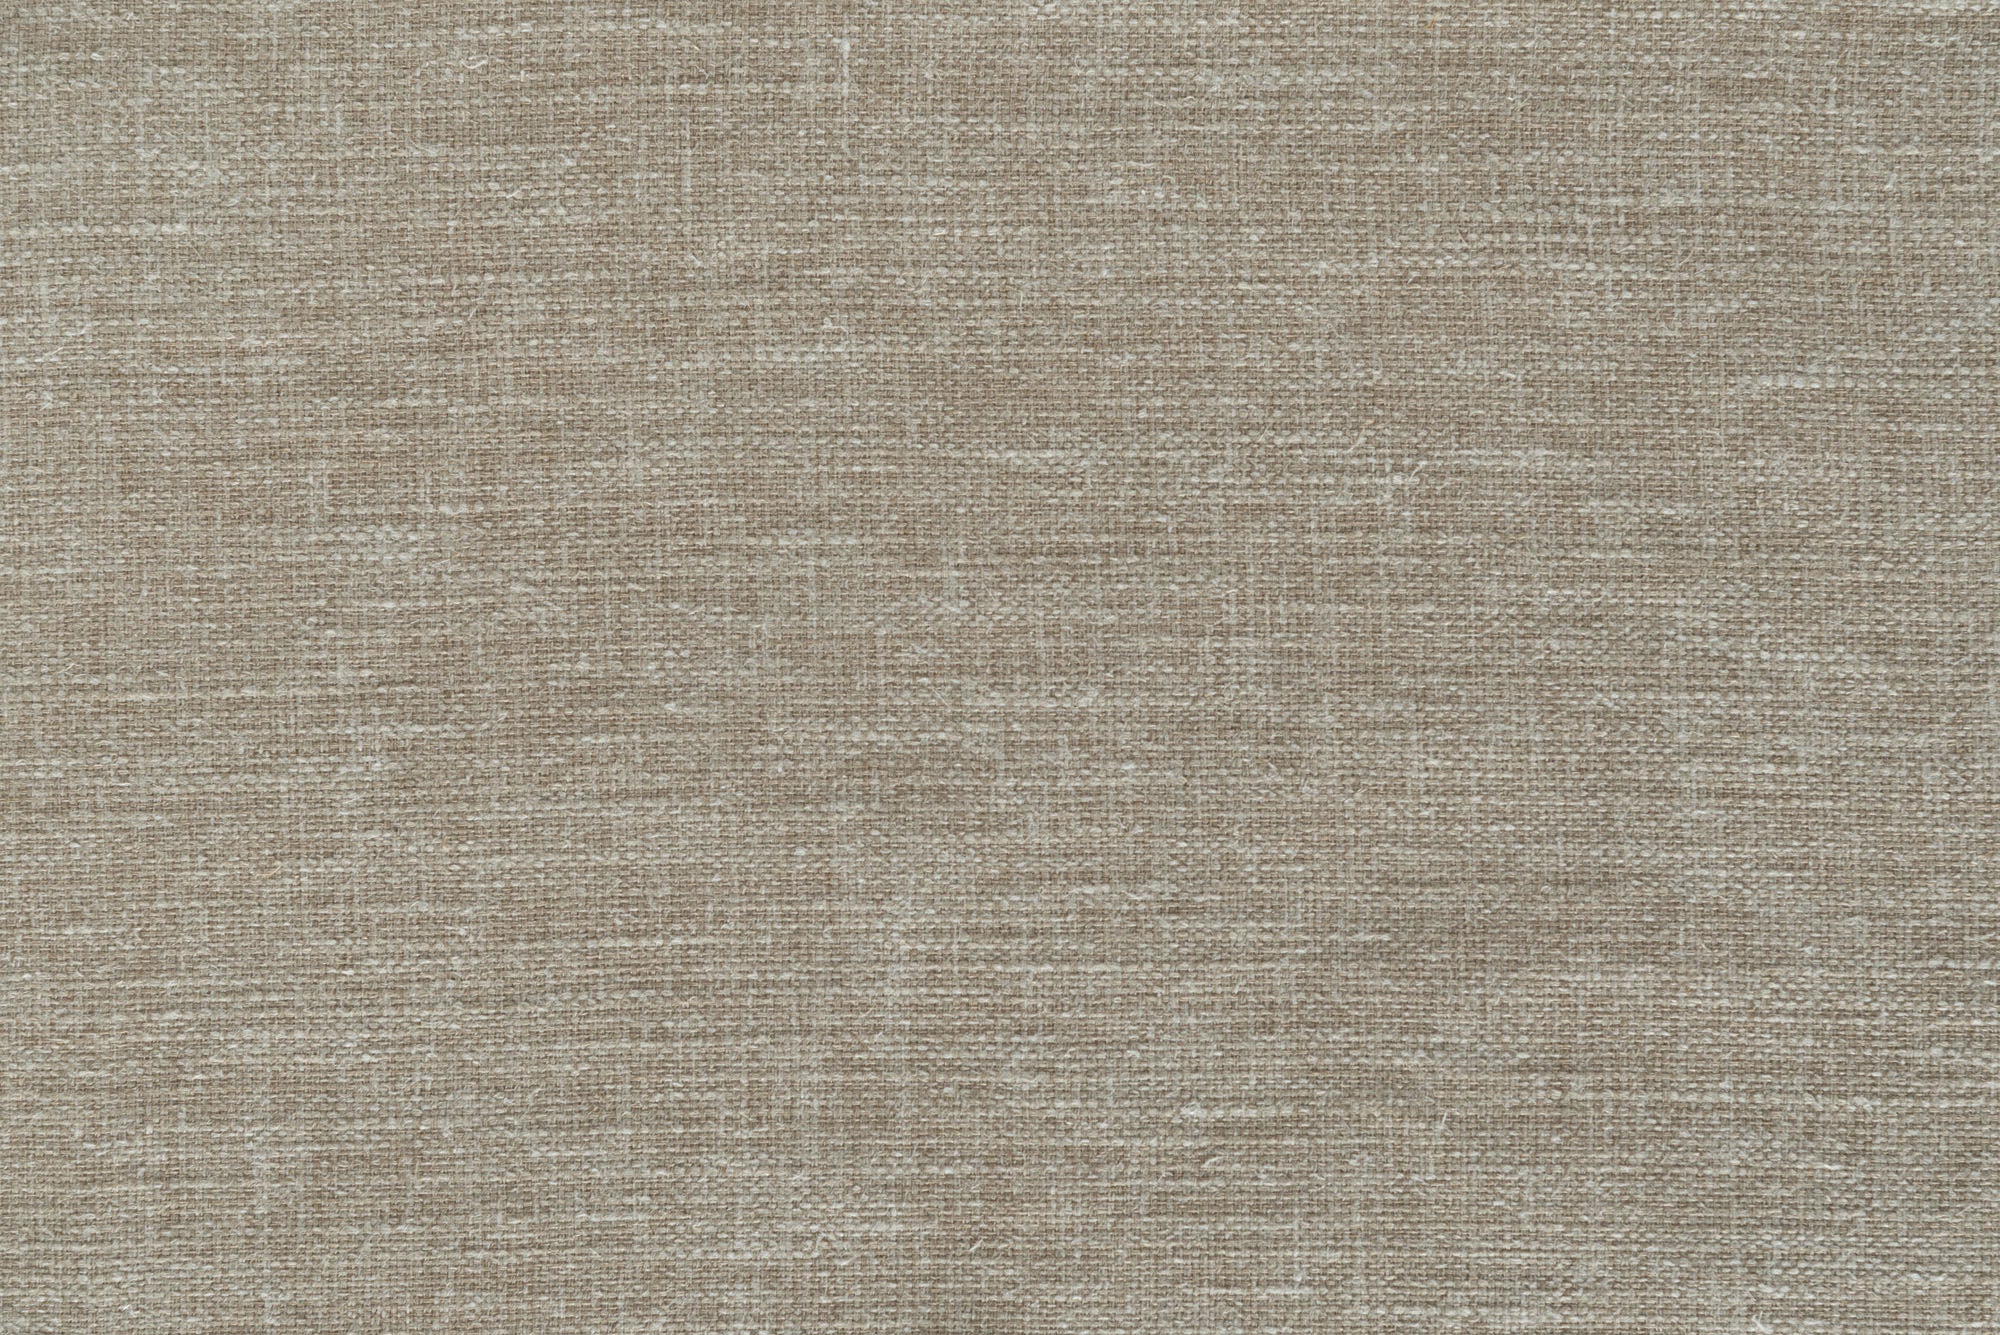 Audinys, Premiere, taupe - Taupe